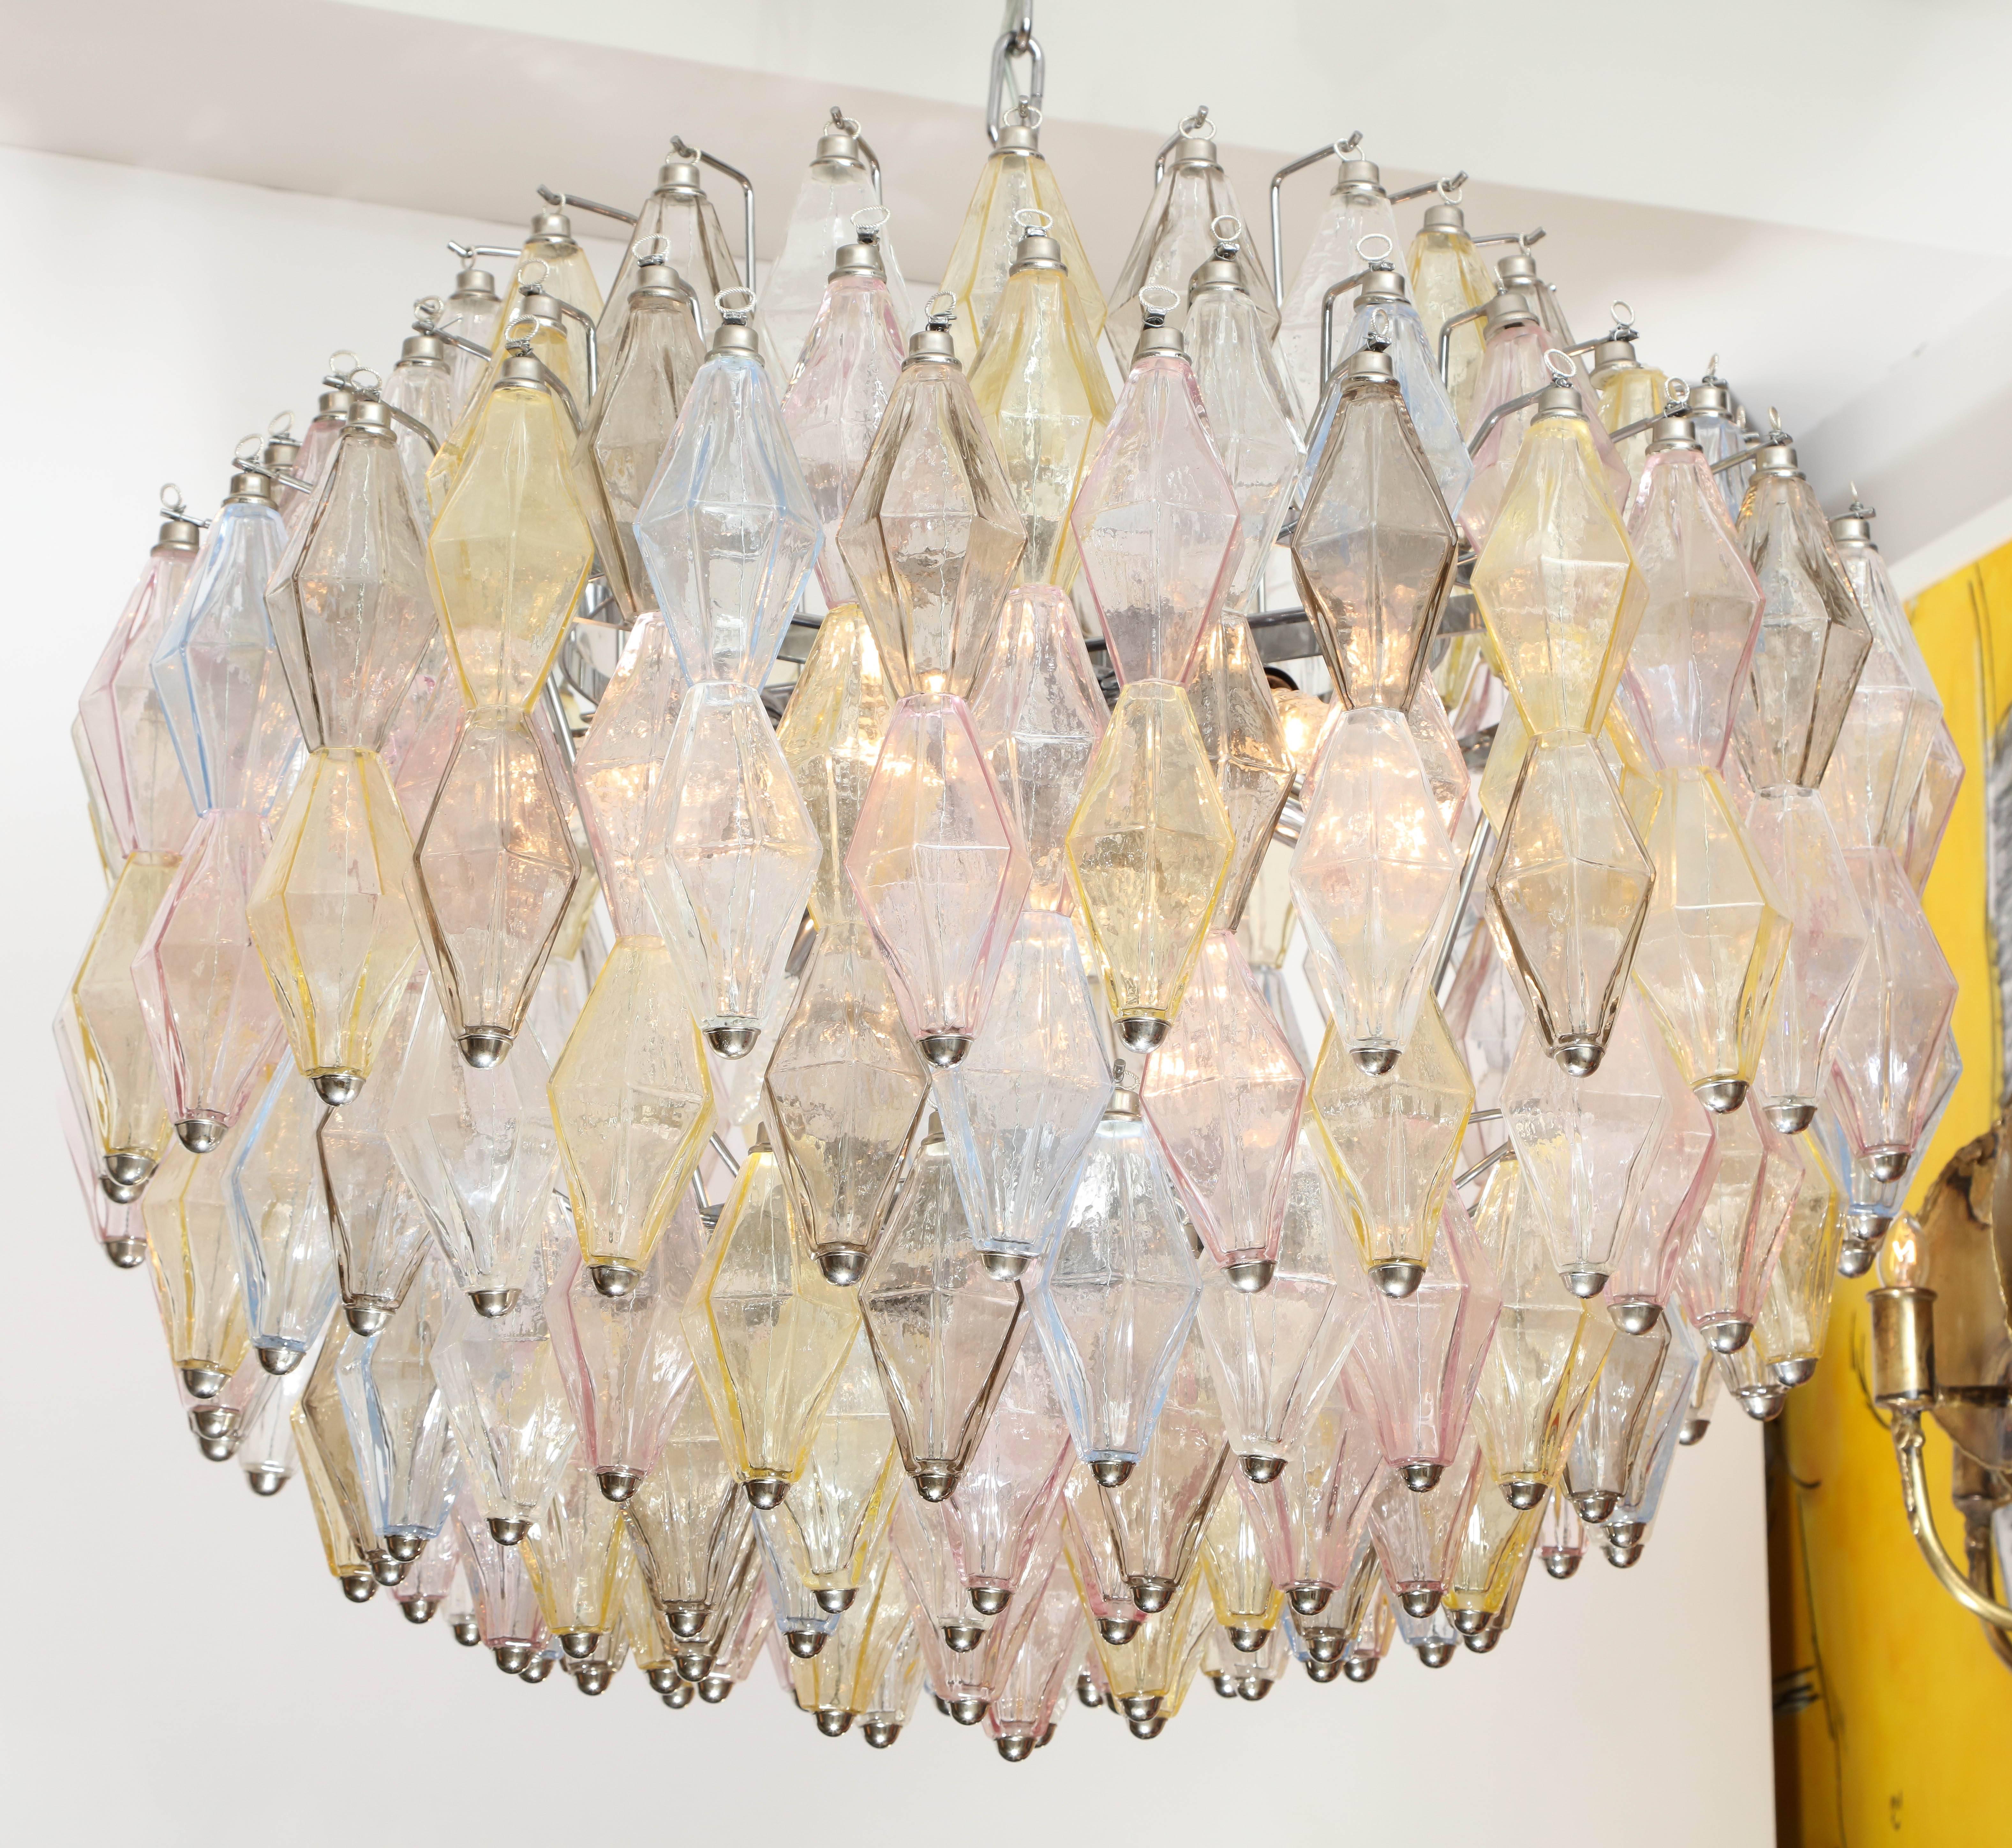 Decorative large multicolor polyhedral glass chandelier with chrome frame. 
Light yellow, pink, blue, smoke and clear colors.
Murano, Italy.